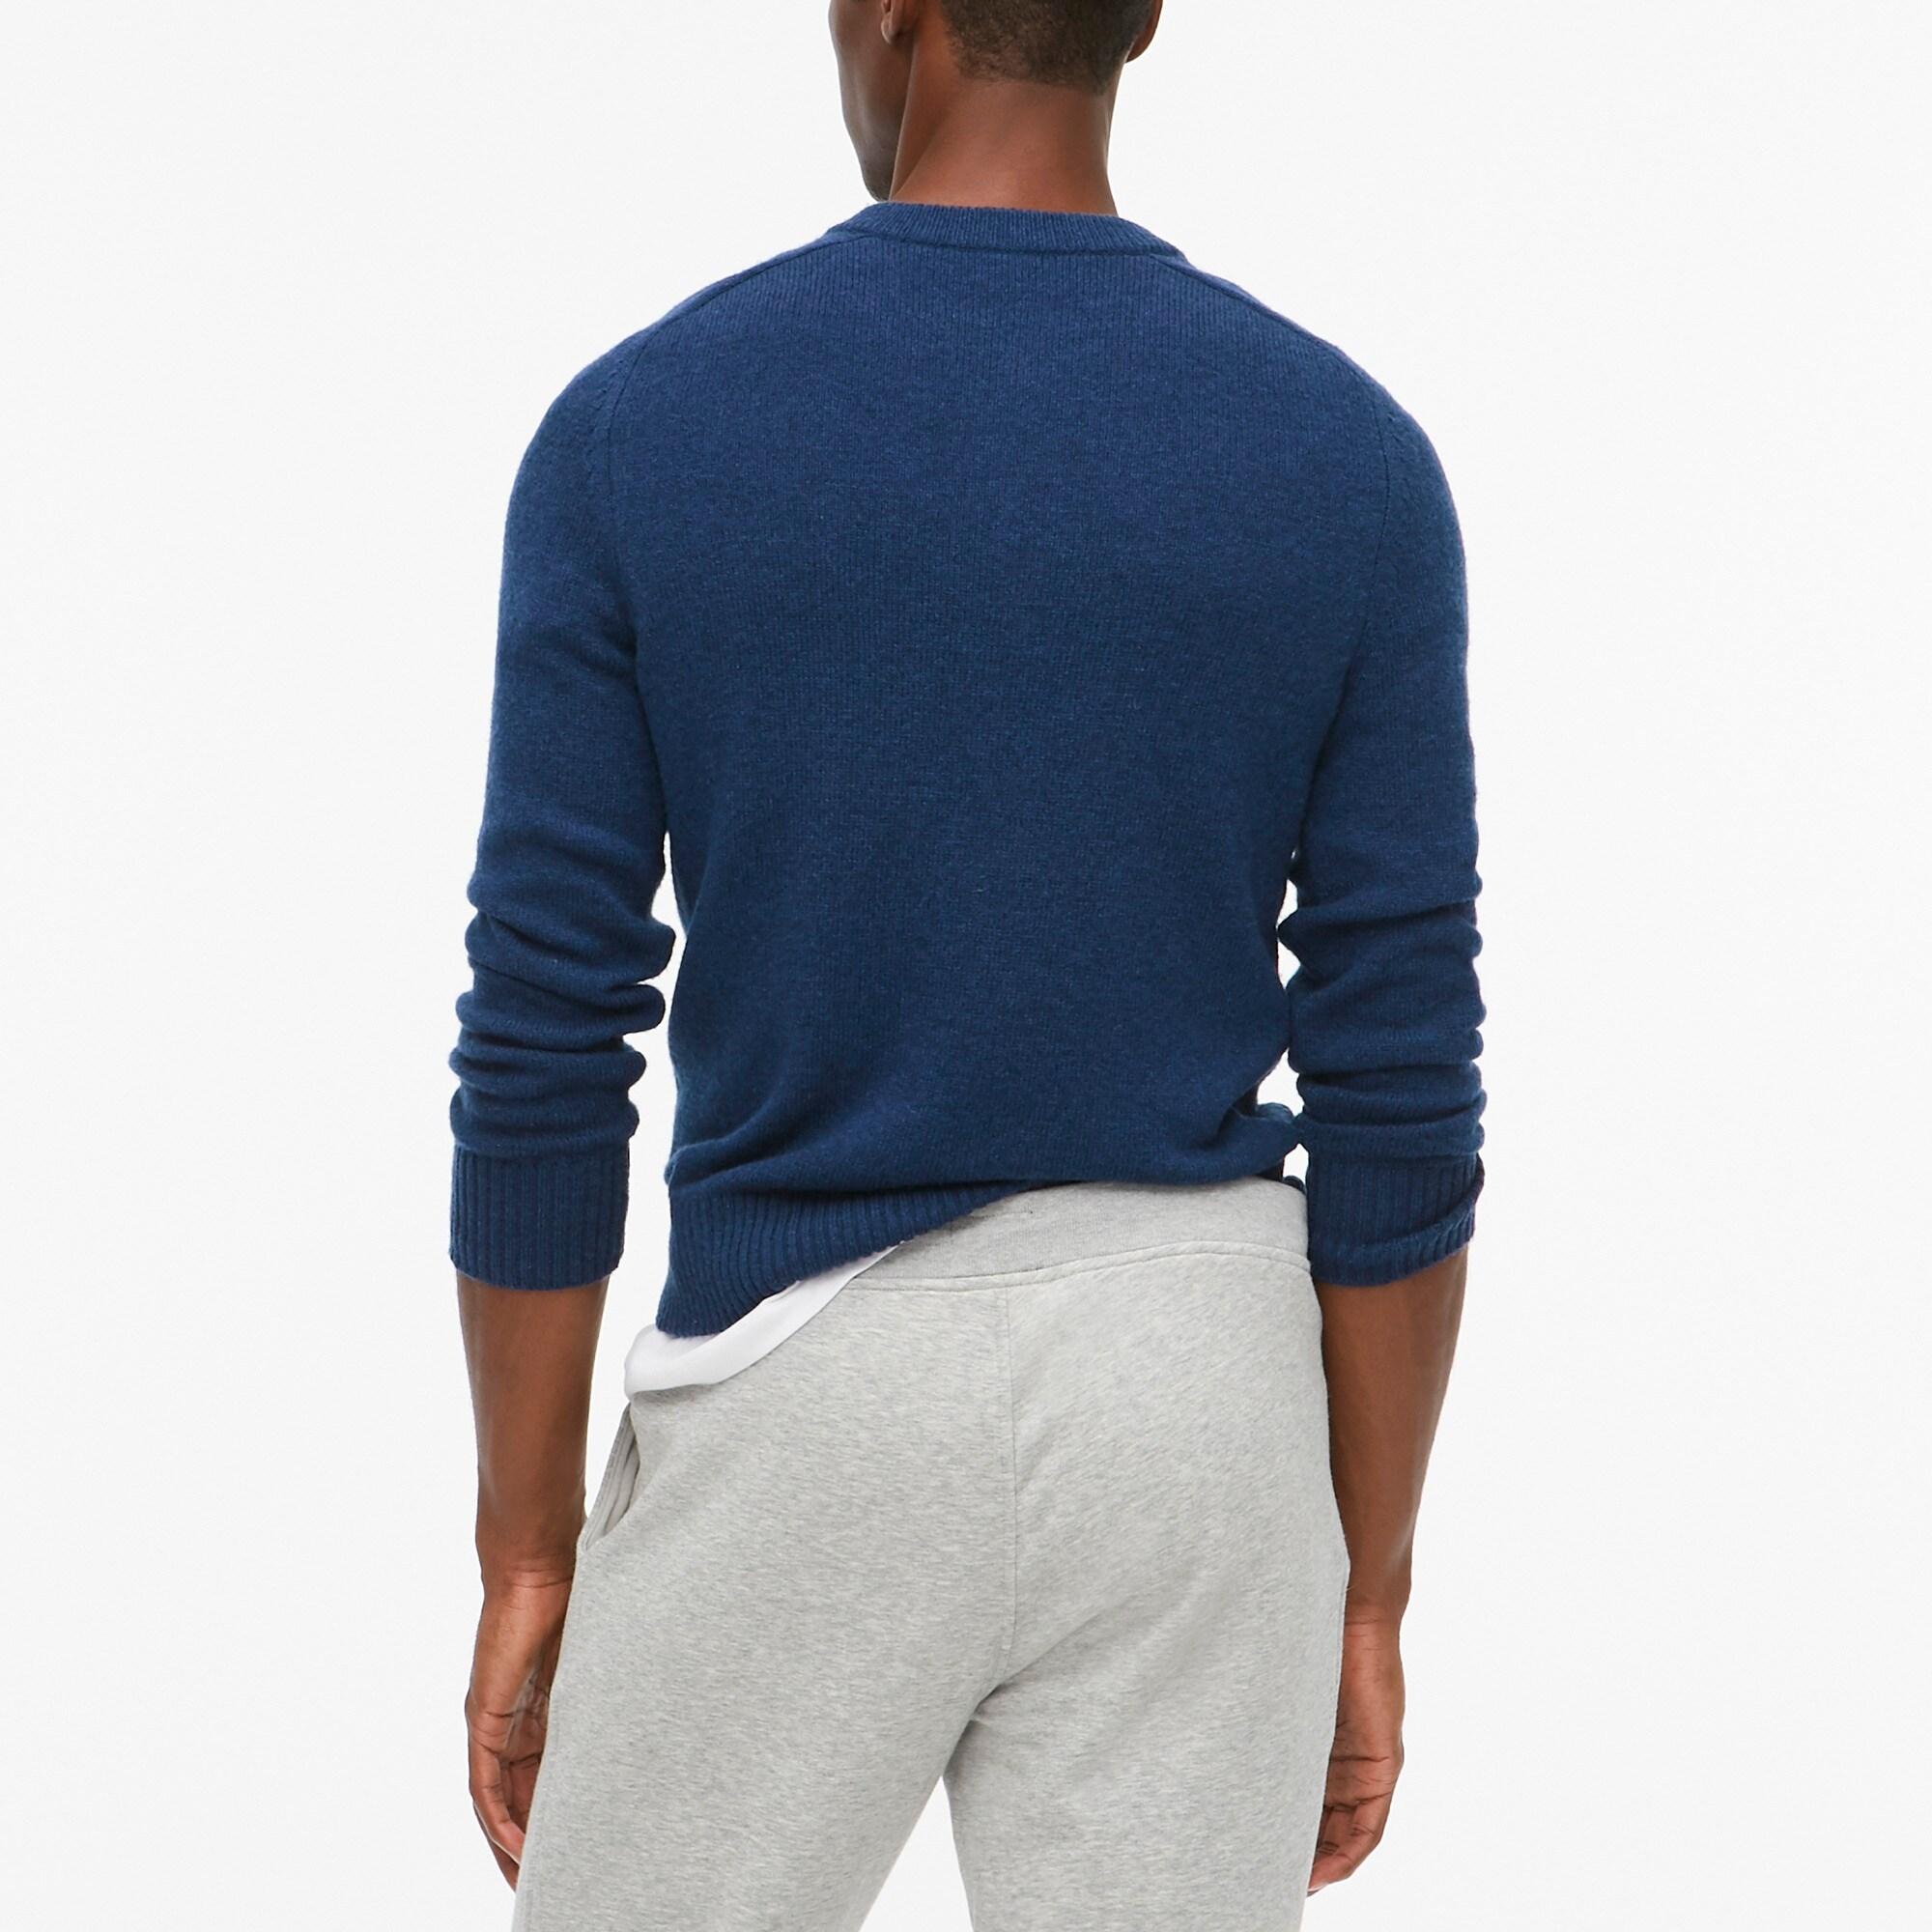 J.Crew Synthetic Lambswool-blend Henley Sweater in Blue for Men - Lyst